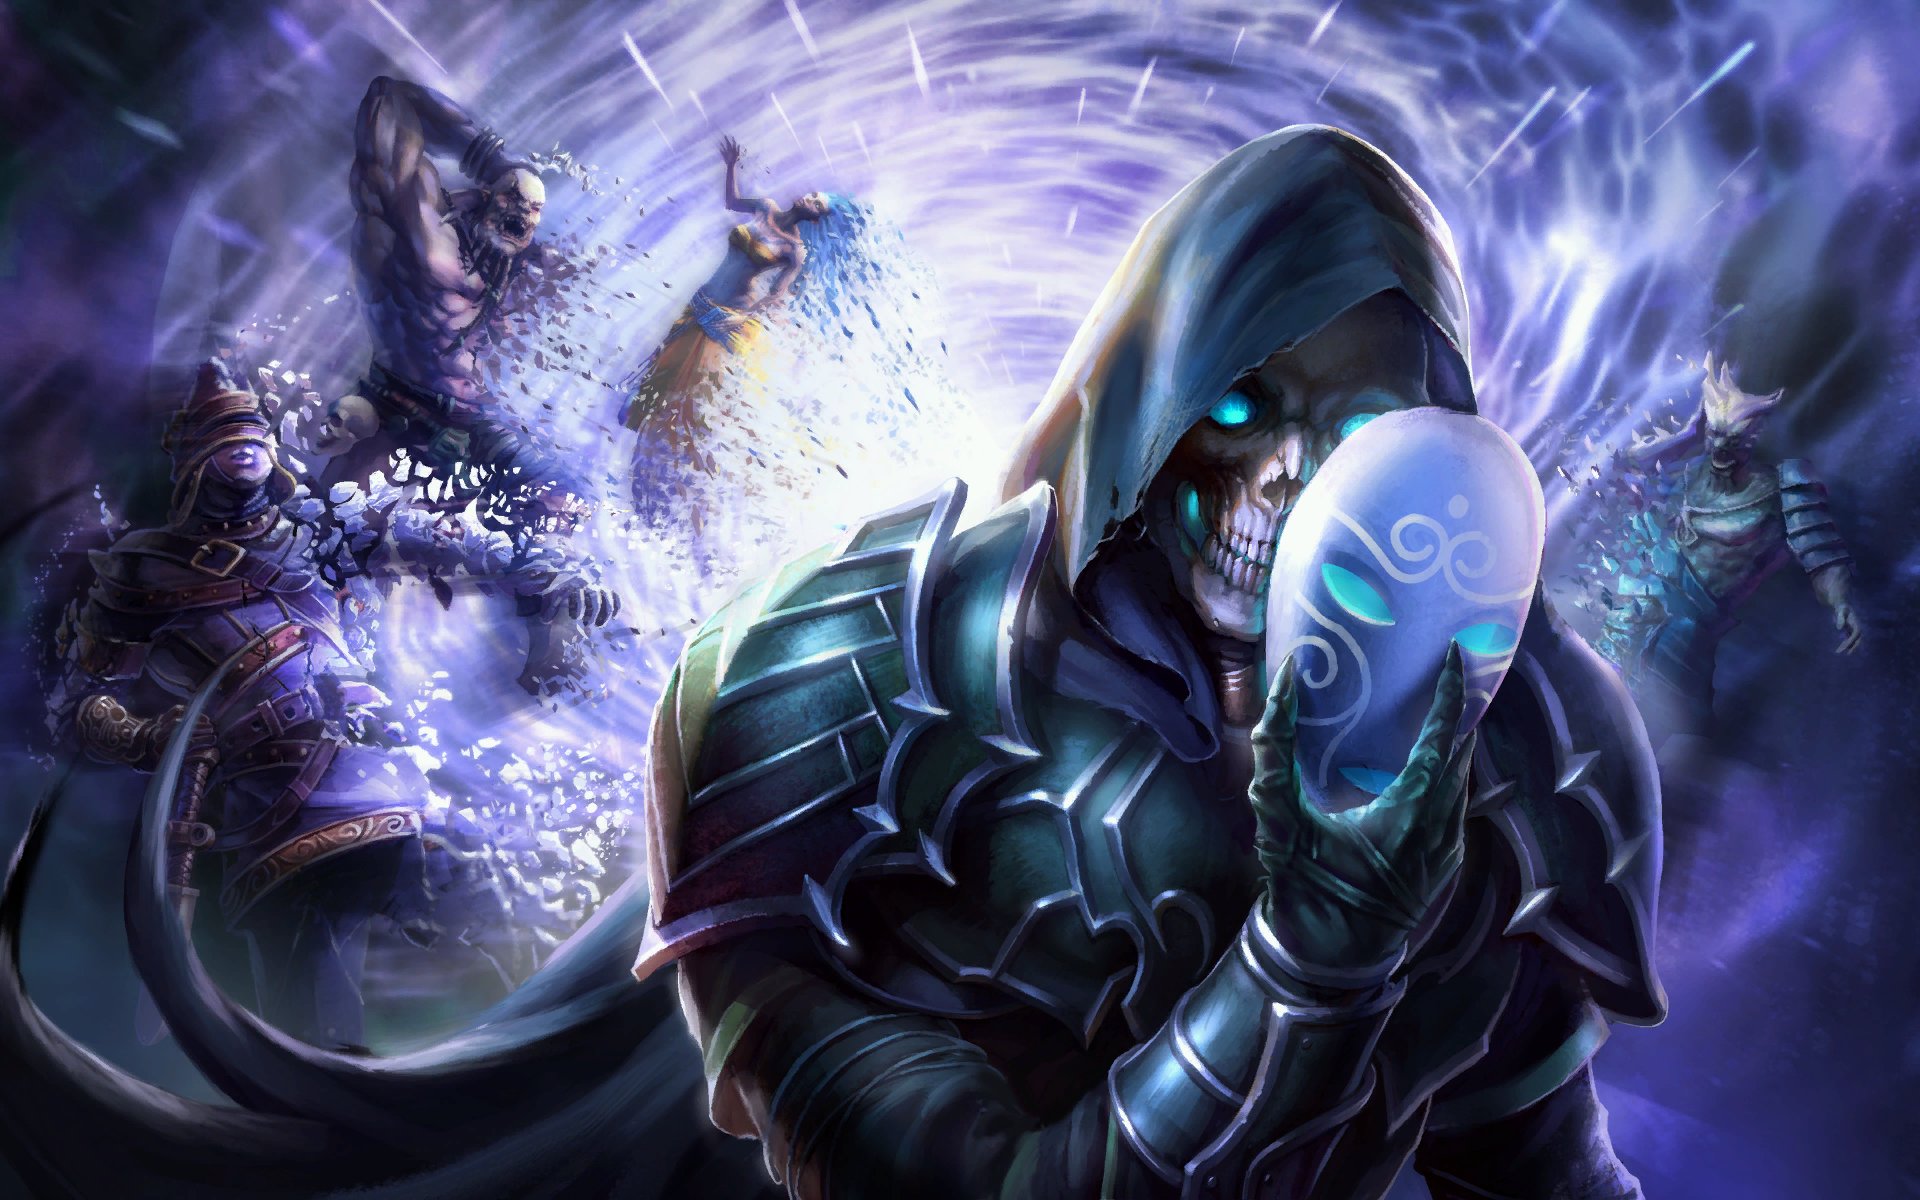 heroes, Might, Magic, Strategy, Fantasy, Fighting, Adventure, Action, Online, 1hmm, Mask, Skull, Monster, Reaper Wallpaper